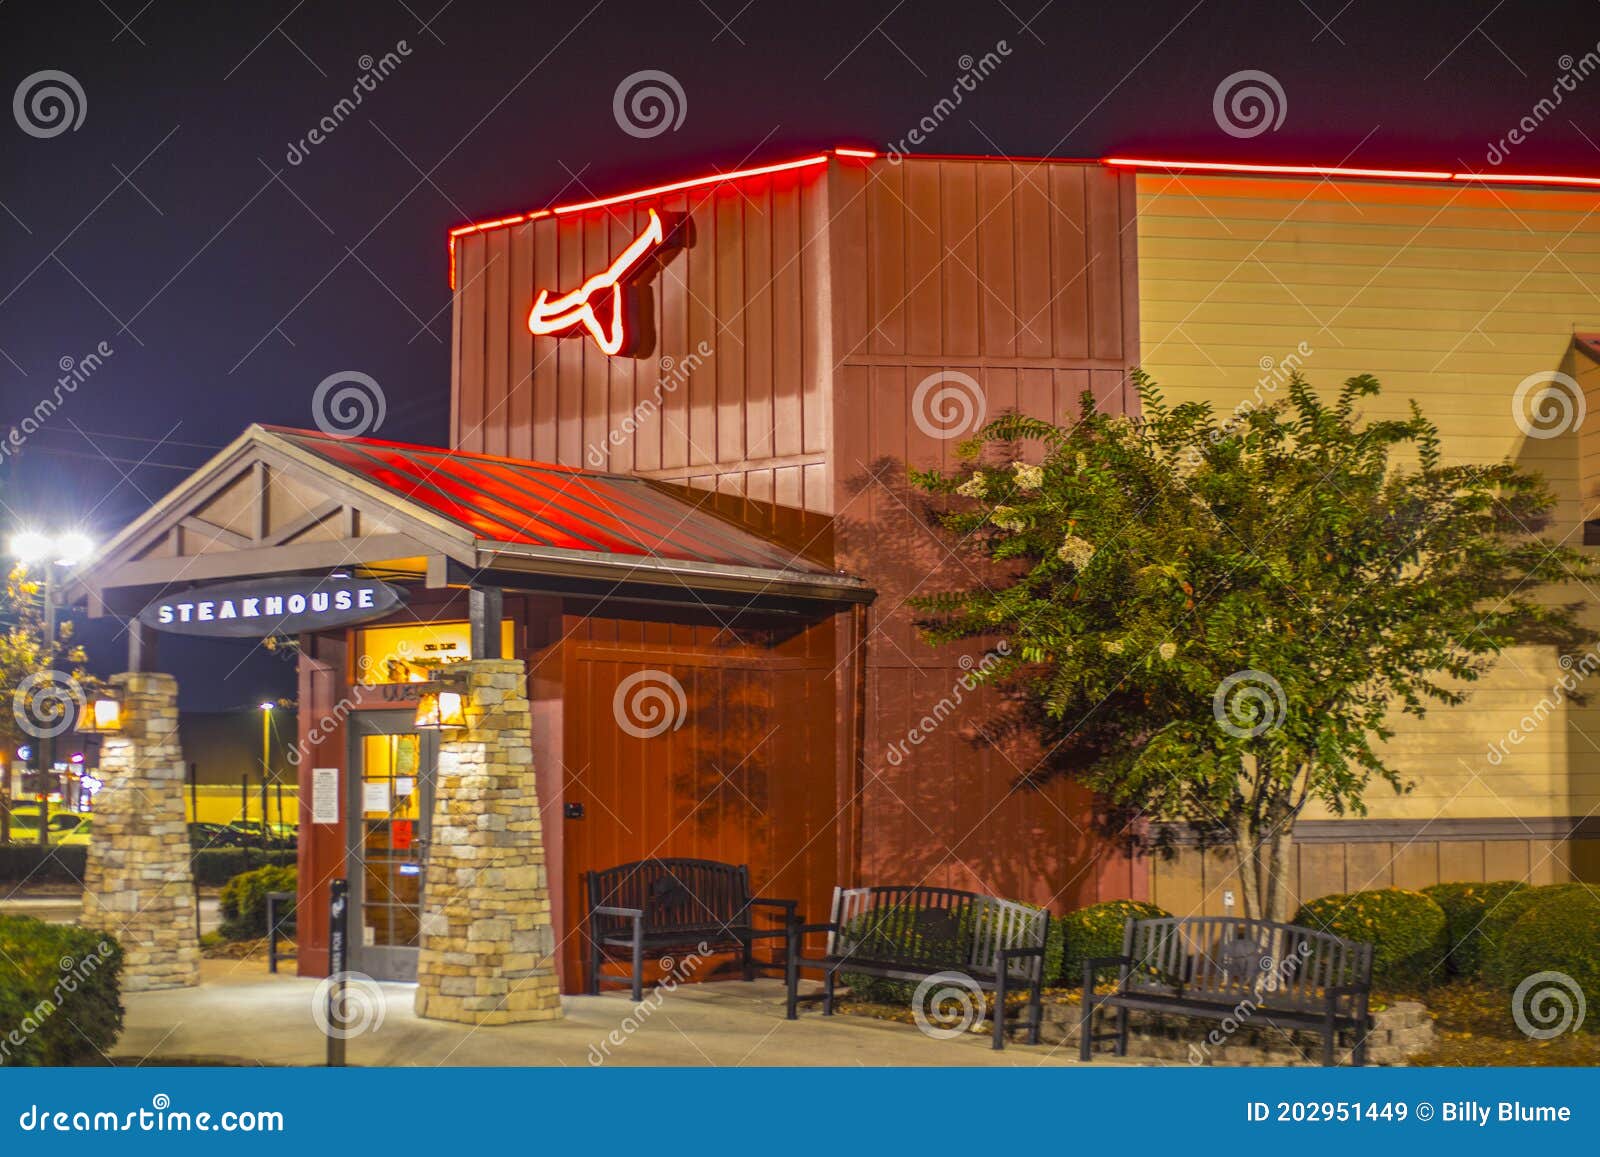 1 743 Entrance Night Restaurant Photos Free Royalty Free Stock Photos From Dreamstime